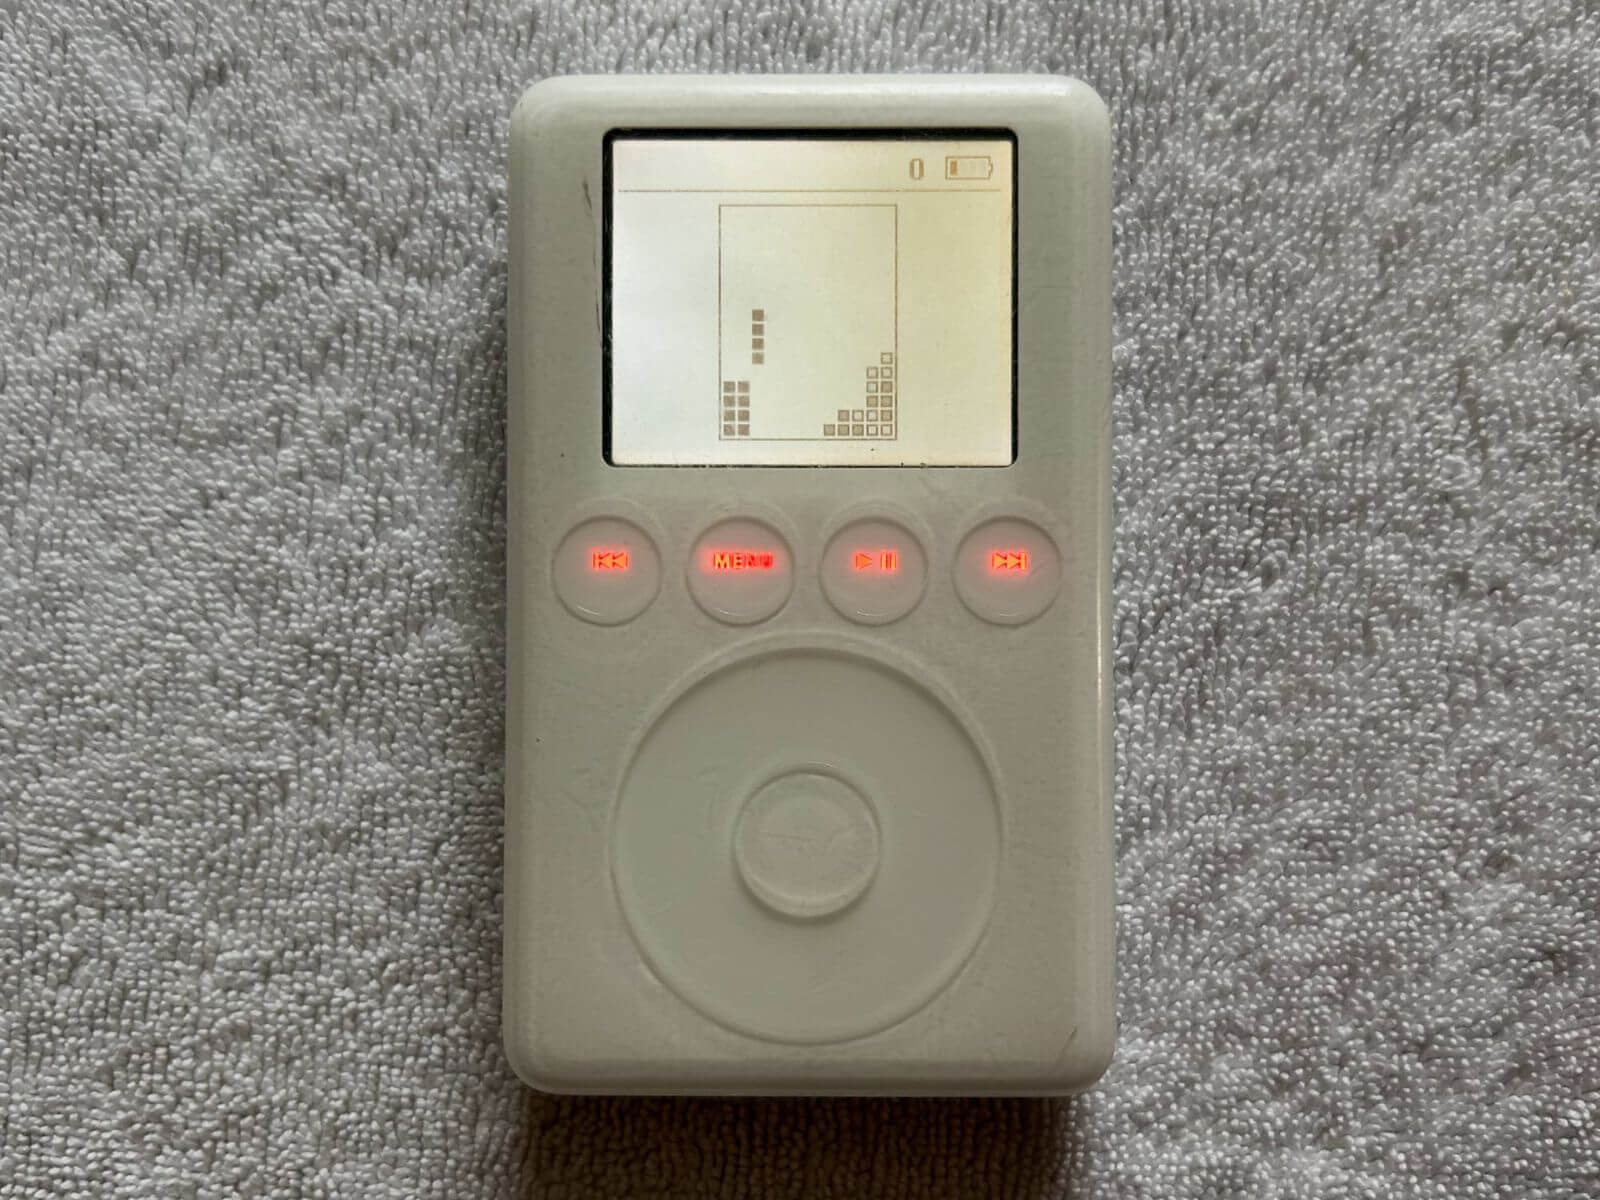 Unreleased Tetris-like Game ‘Stacker’ Found in Prototype Third-Generation iPod